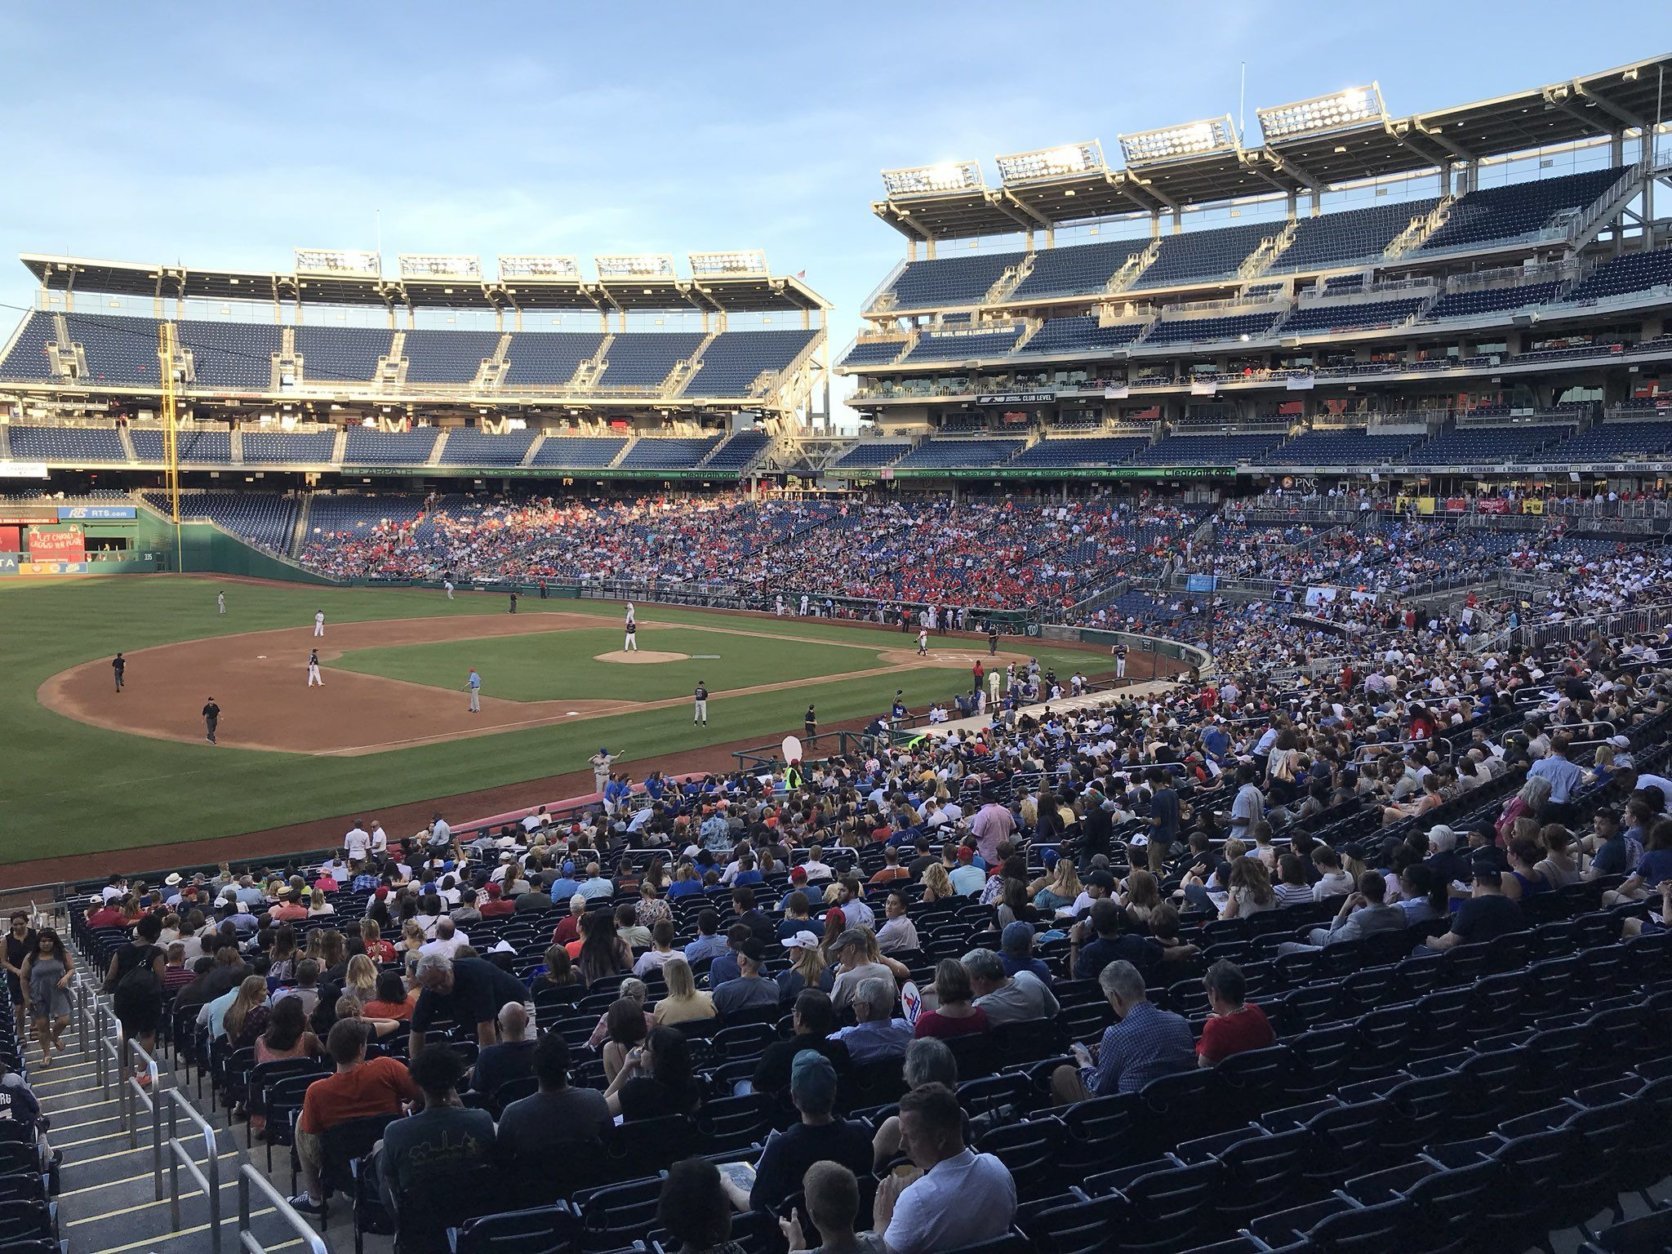 About 30 minutes into the game, there's still no score, but the crowd seems to be enjoying the weather at the Congressional Baseball Game on Thursday, June 14, 2018. (WTOP/Michelle Basch)